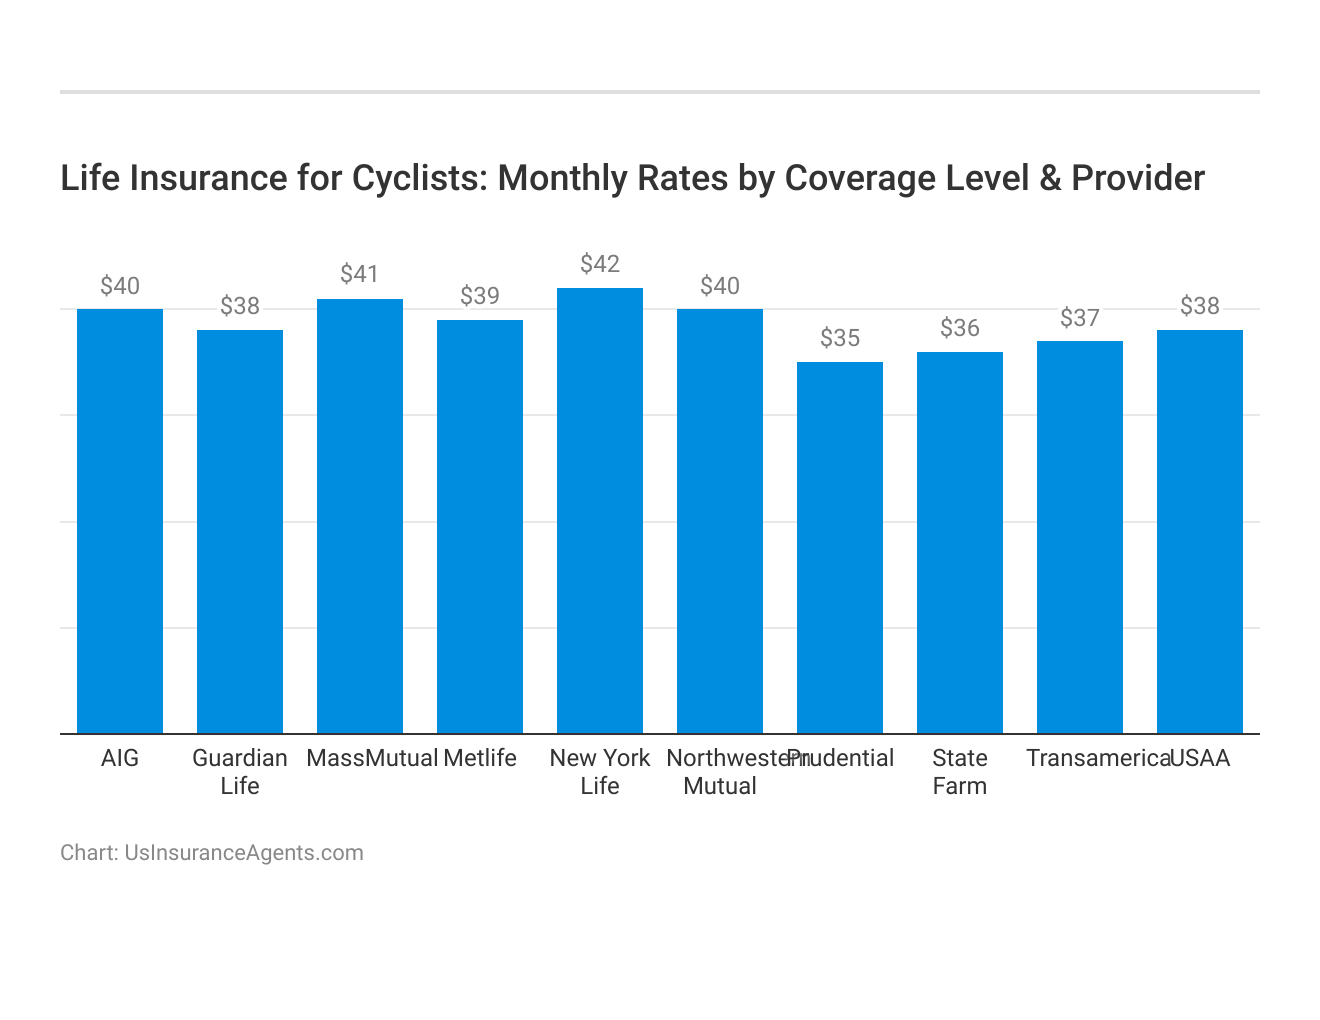 <h3>Life Insurance for Cyclists: Monthly Rates by Coverage Level & Provider</h3>